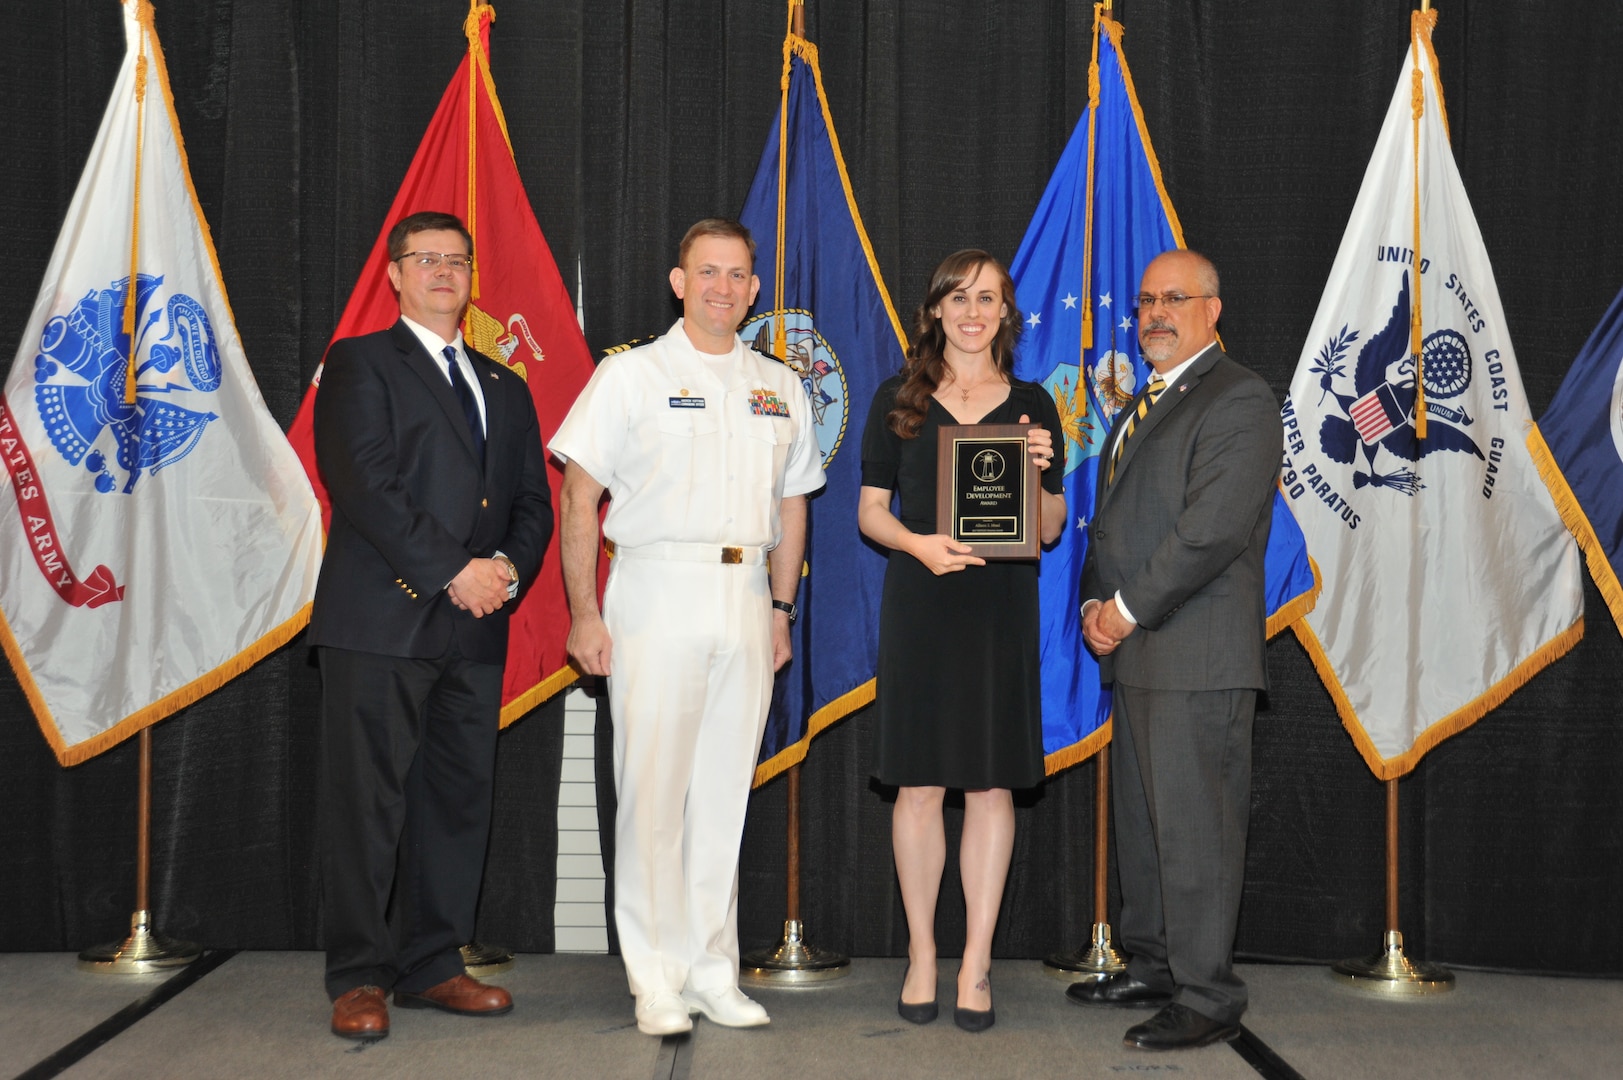 IMAGE: Allison Mead is presented the Employee Development Award at Naval Surface Warfare Center Dahlgren Division's annual awards ceremony, Apr. 26 at the Fredericksburg Expo and Conference Center.

The Employee Development Award was established to recognize those individuals who – through their leadership and commitment – have made exemplary contributions to the development of others.